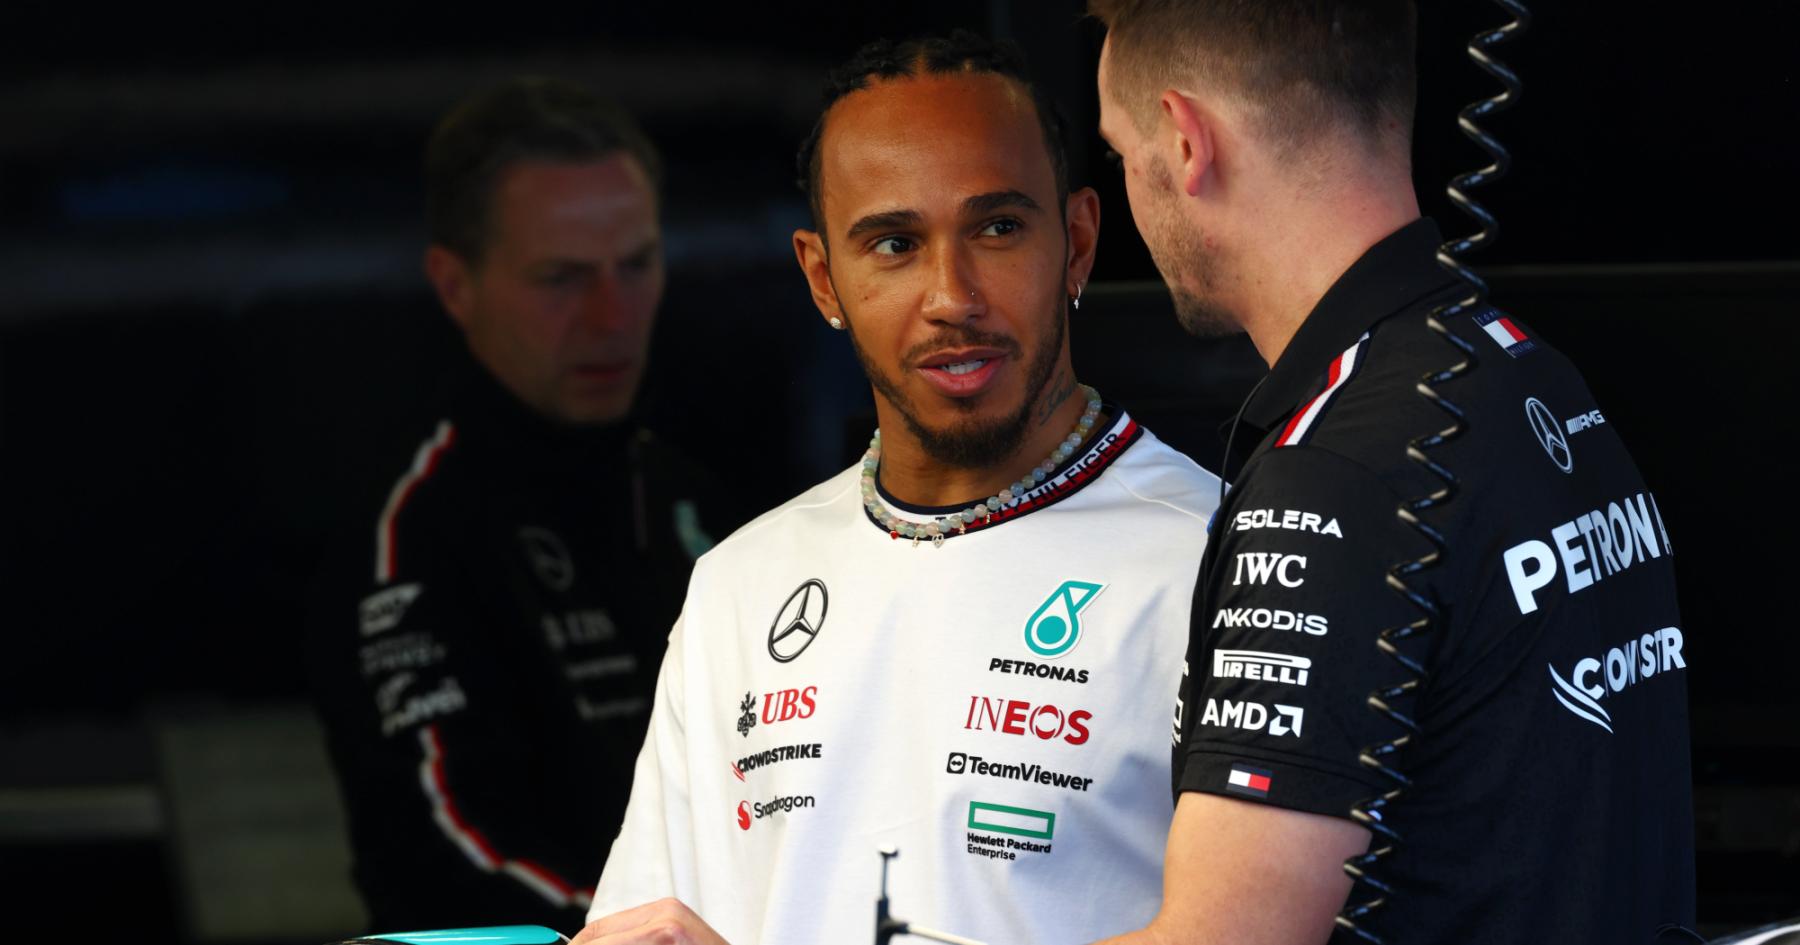 Unstoppable Ambition: Hamilton's Resolve to Dominate and Succeed Above All Others